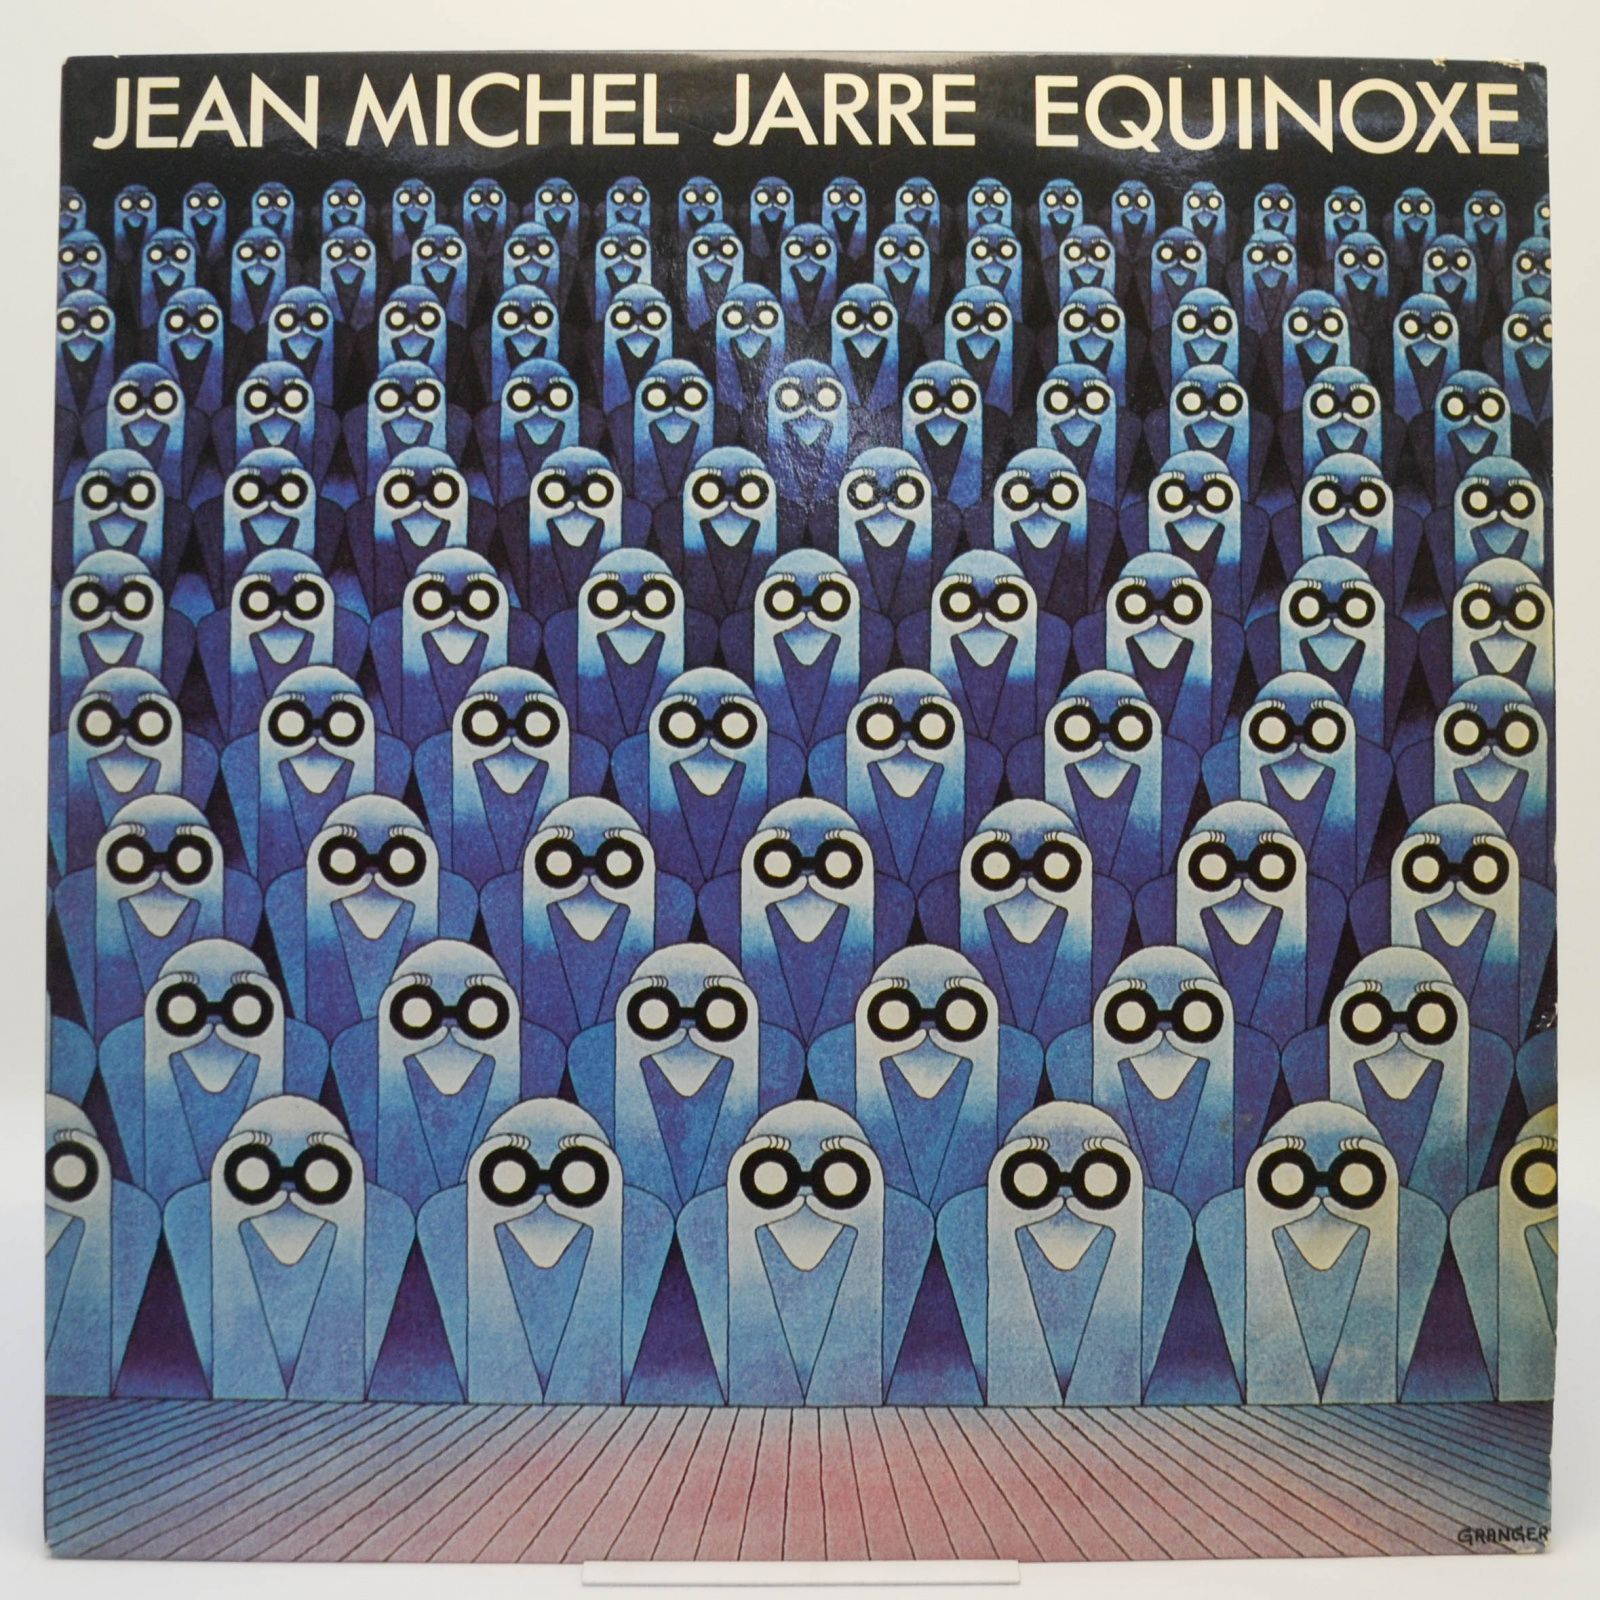 Equinoxe (France), 1978